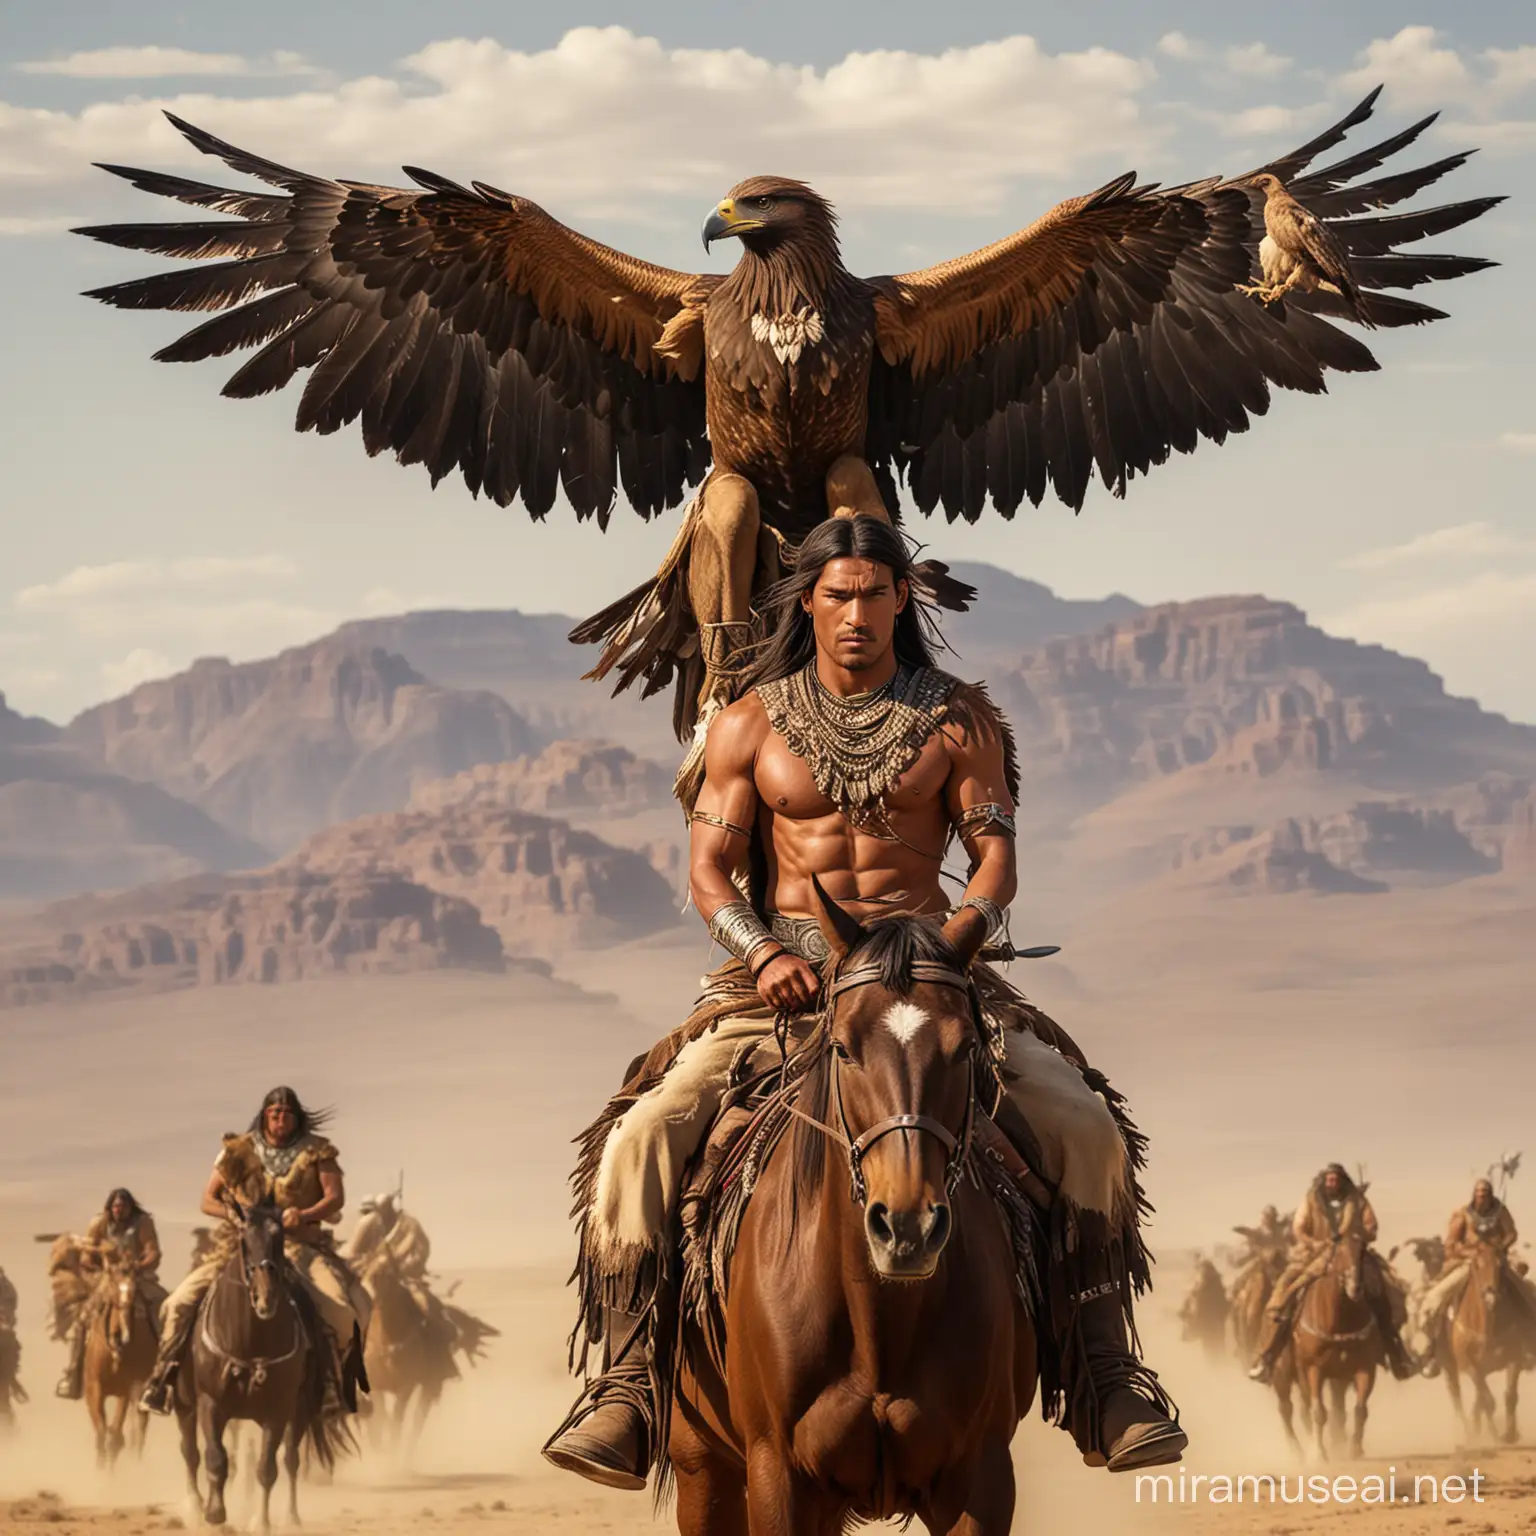 Apache Warrior with Eagle Wings Riding Horseback in Desert